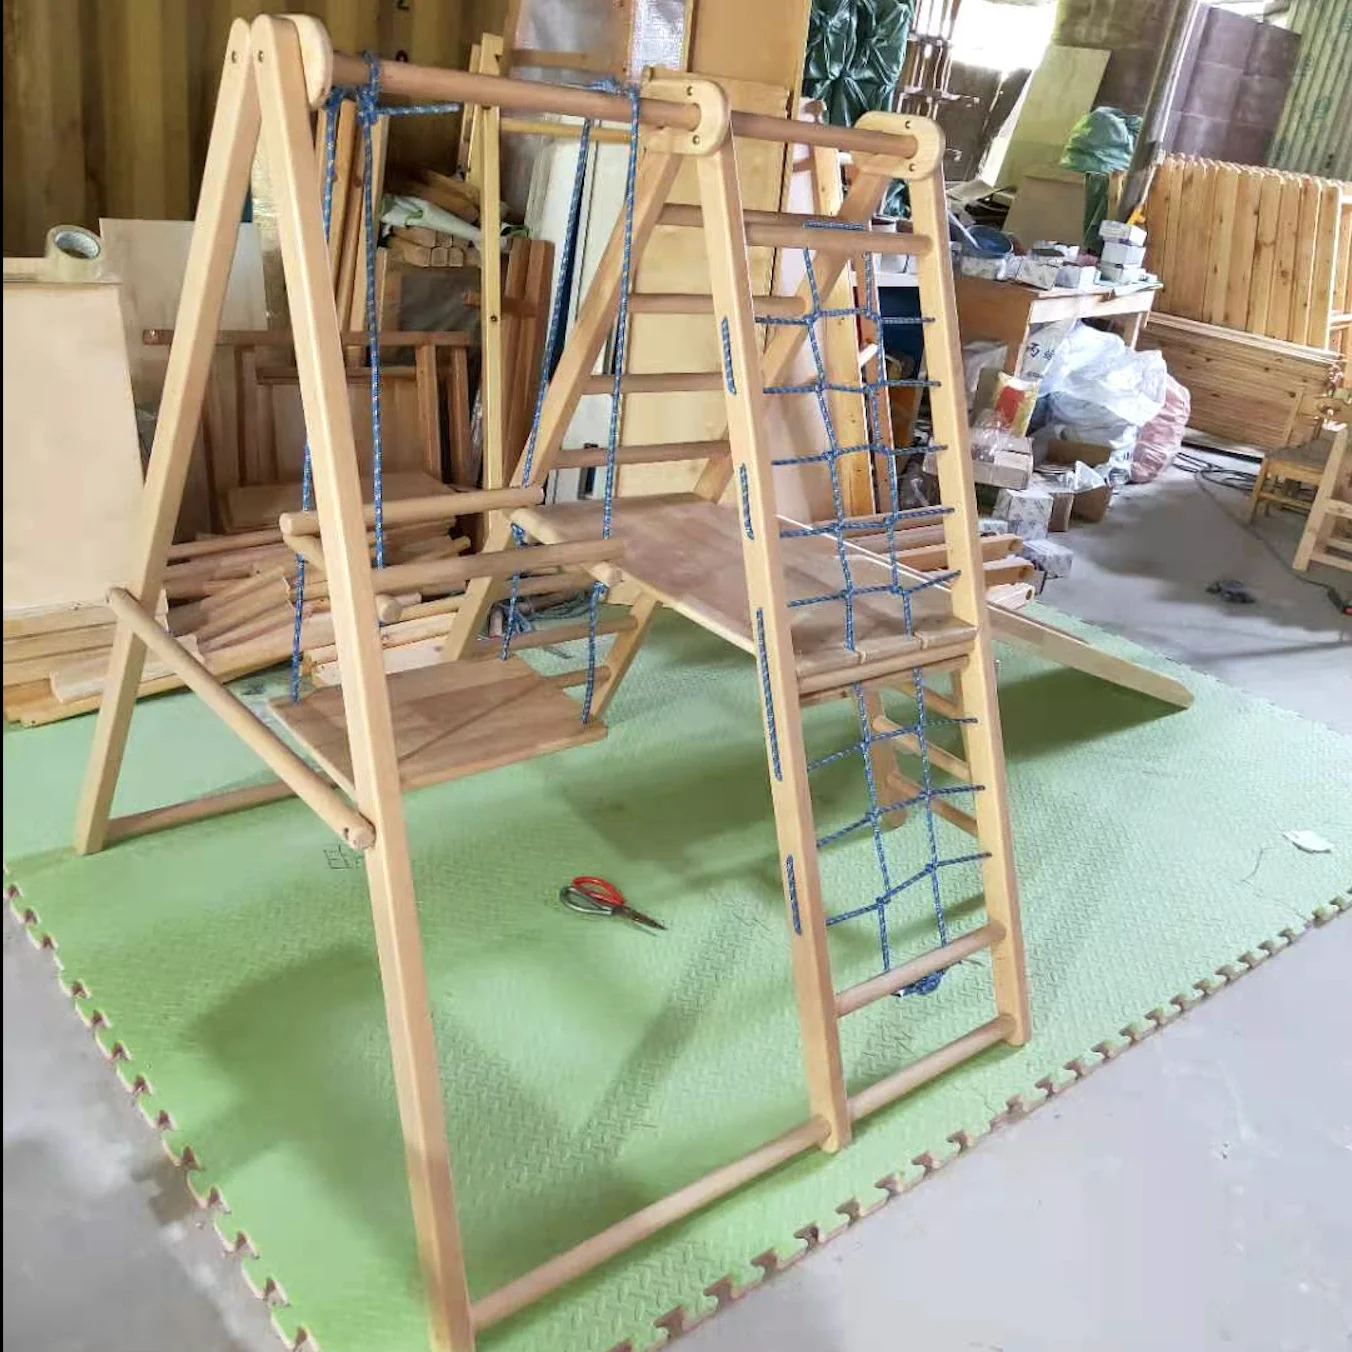 Children indoor playground equipment kids wooden climbing frame foldable pikler triangles with a slide:ladder